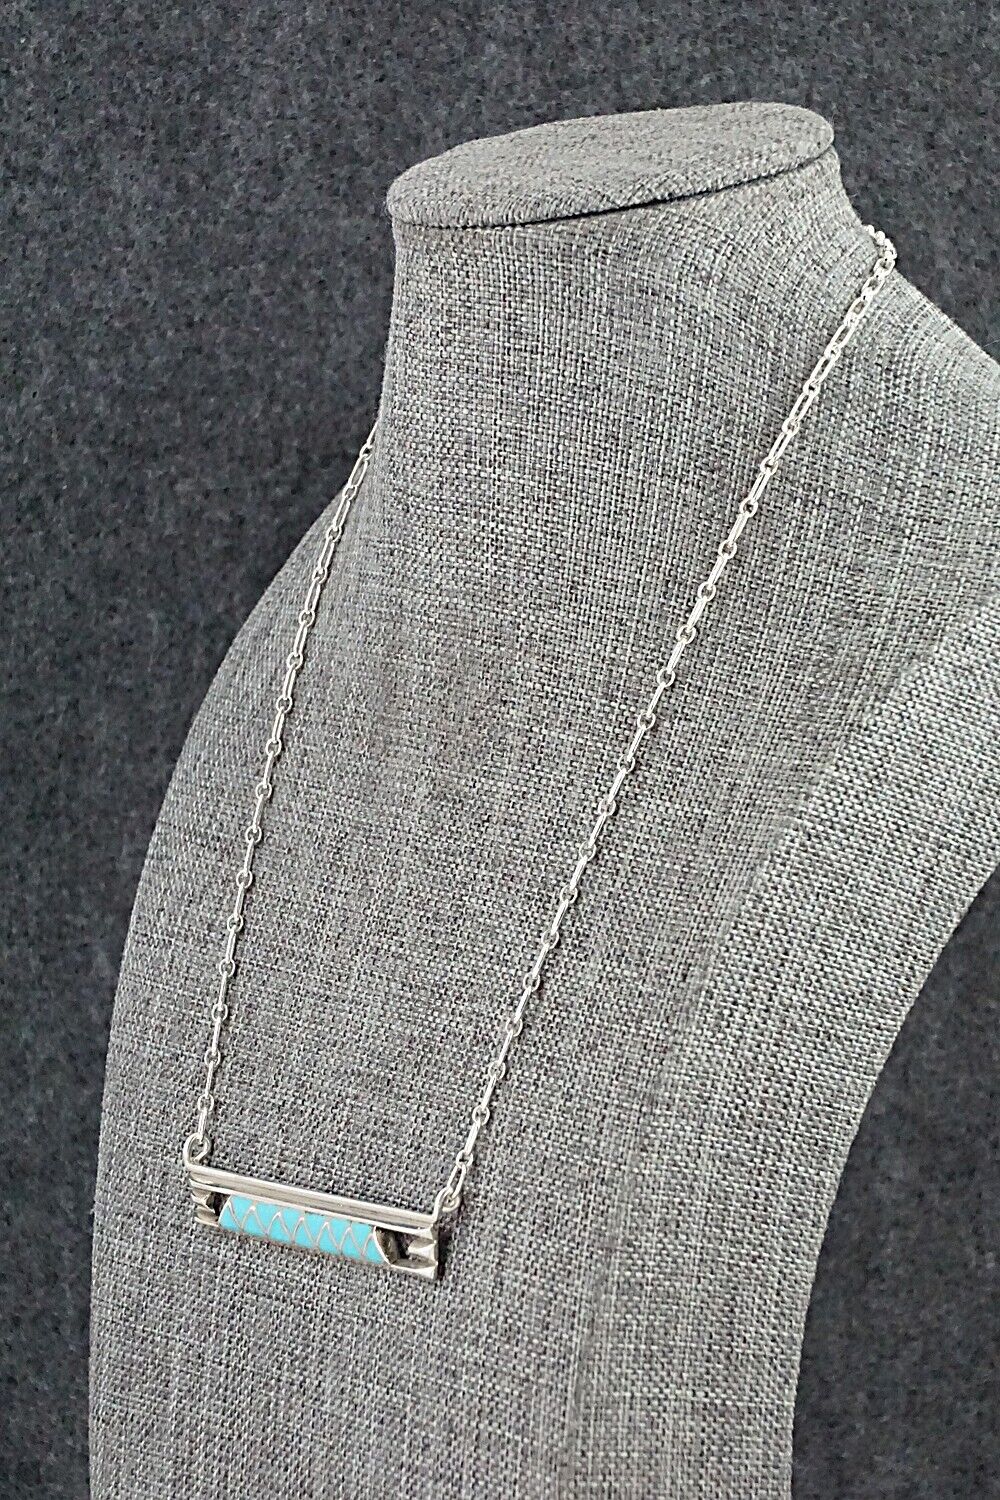 Turquoise & Sterling Silver Necklace - Laurie Kallestewa